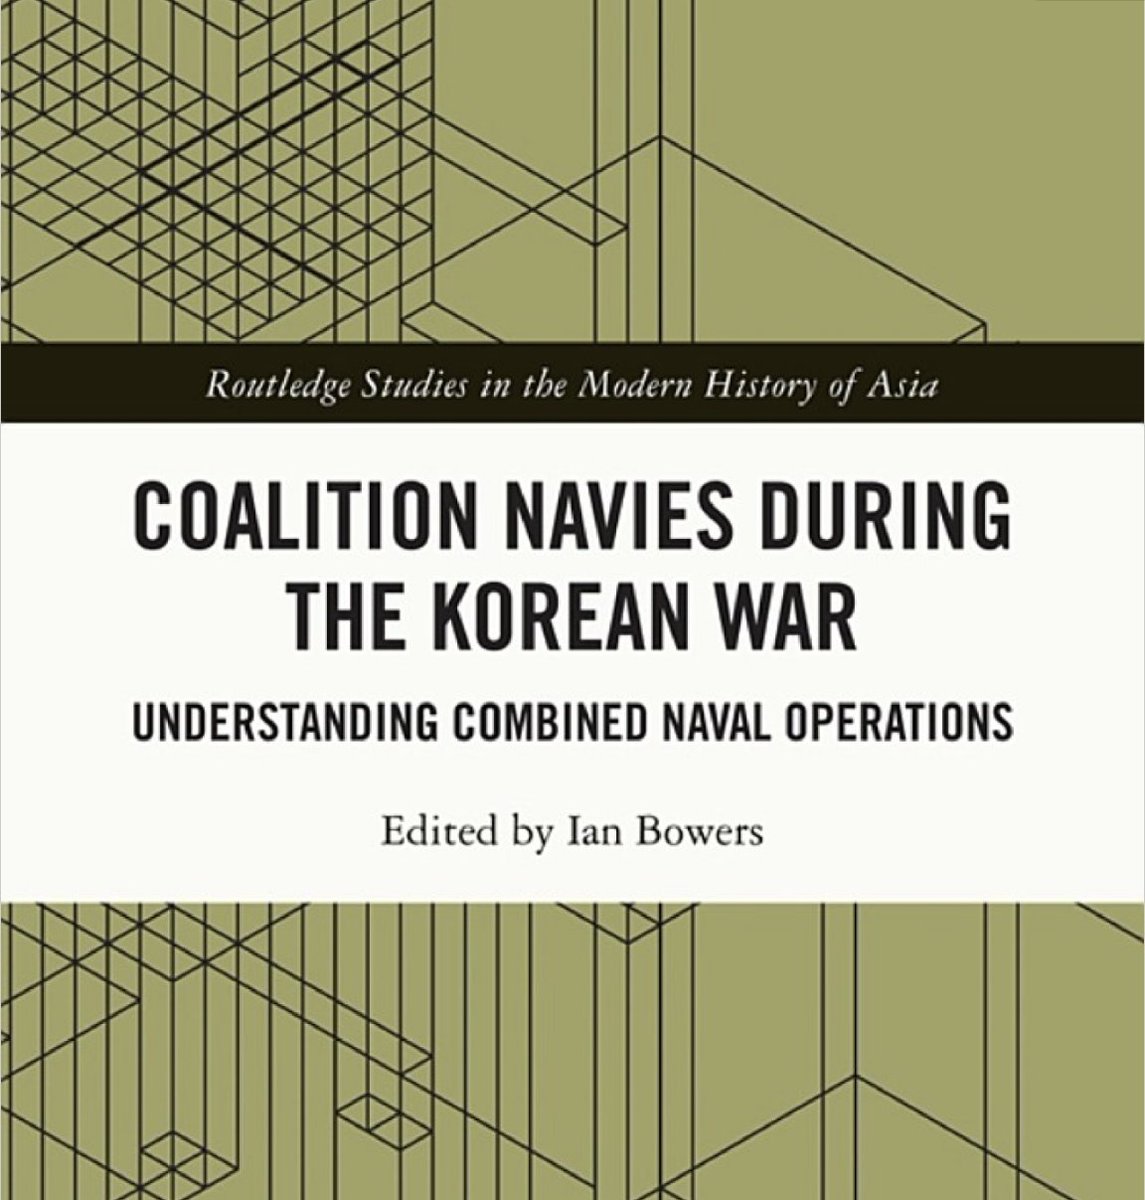 📚🌊 Why is important to analyse the role of navies in the Korean War? 

Professor Deborah Sanders & Dr @timbenbow1 authored two chapters of the book 'Coalition Navies during the Korean War' edited by Professor @ianjbowers. 

Find out more ⬇️
routledge.com/Coalition-Navi…